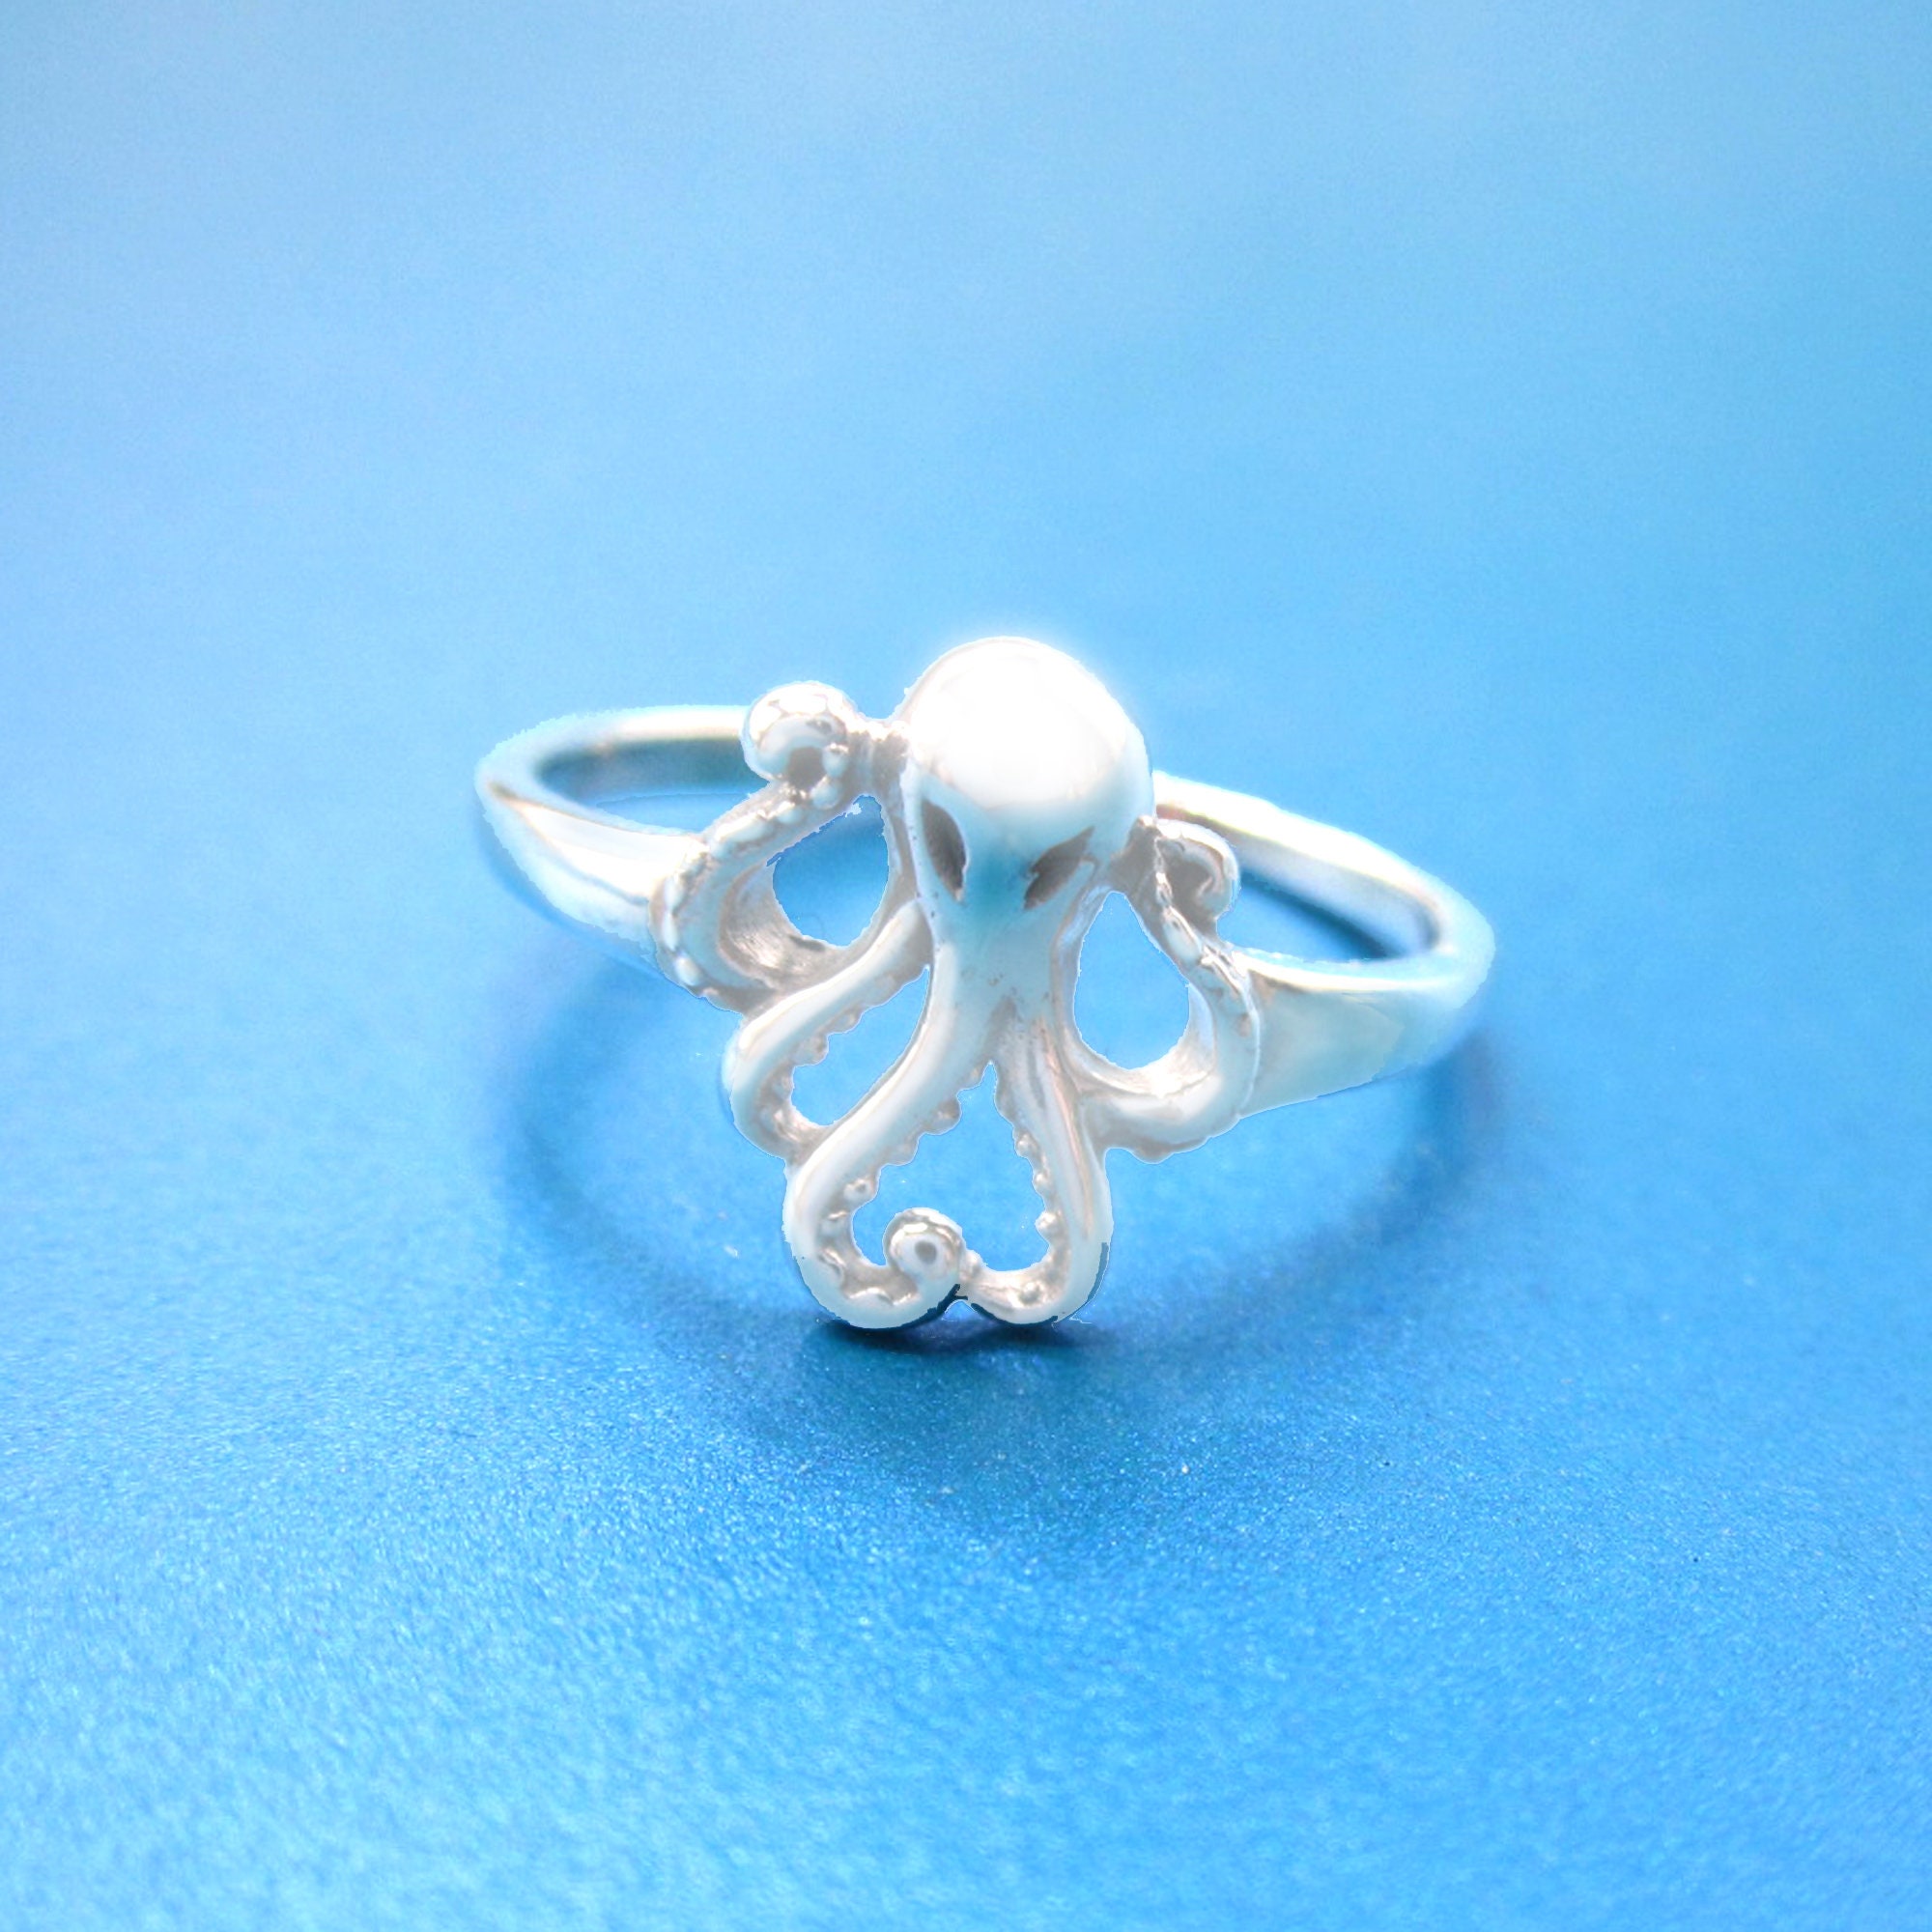 Cool Rings Alloy Gothic Deep sea Squid Octopus Ring fashion jewelry Size..  | eBay